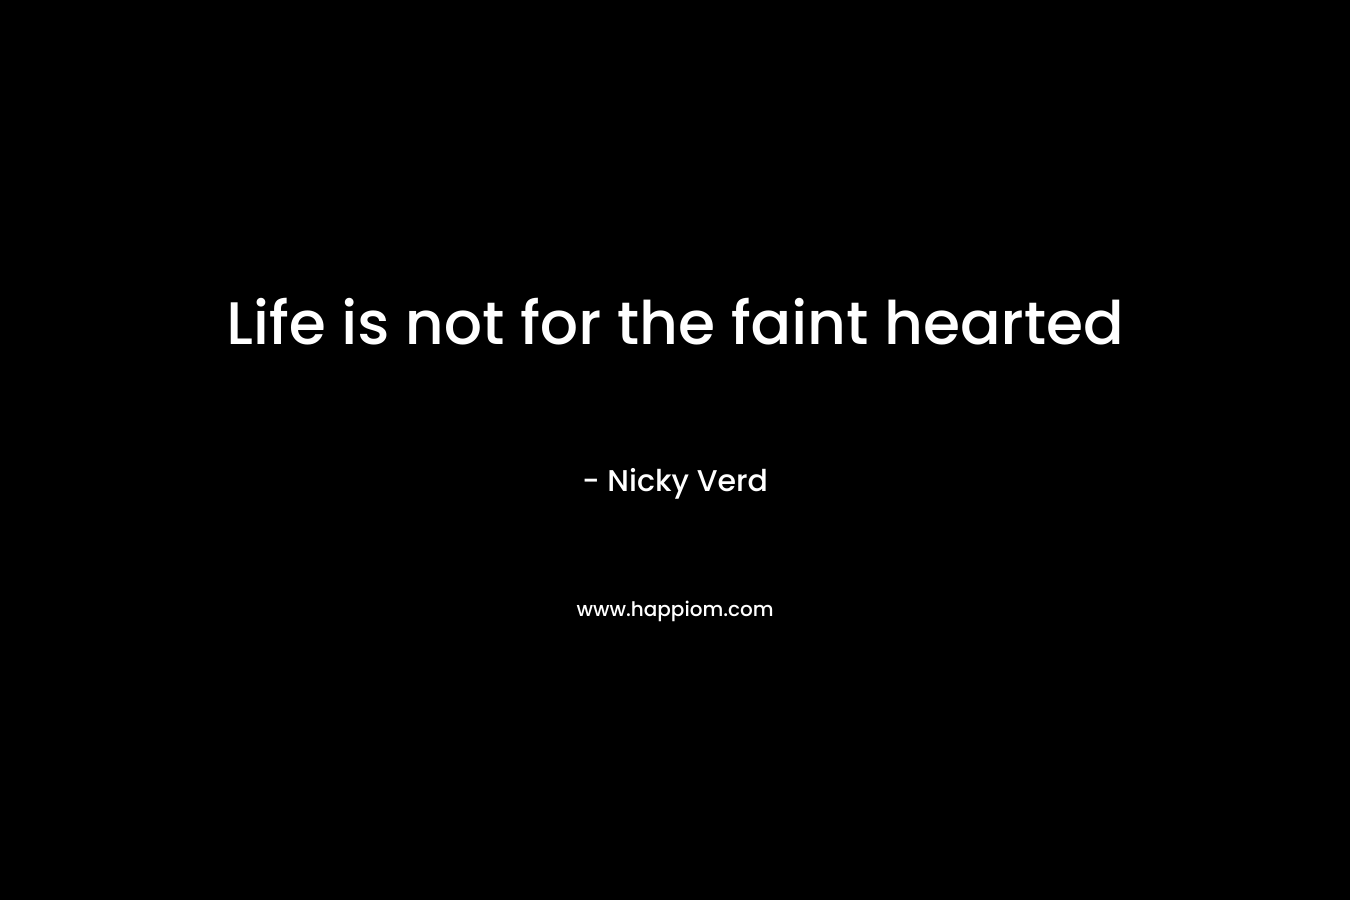 Life is not for the faint hearted – Nicky Verd